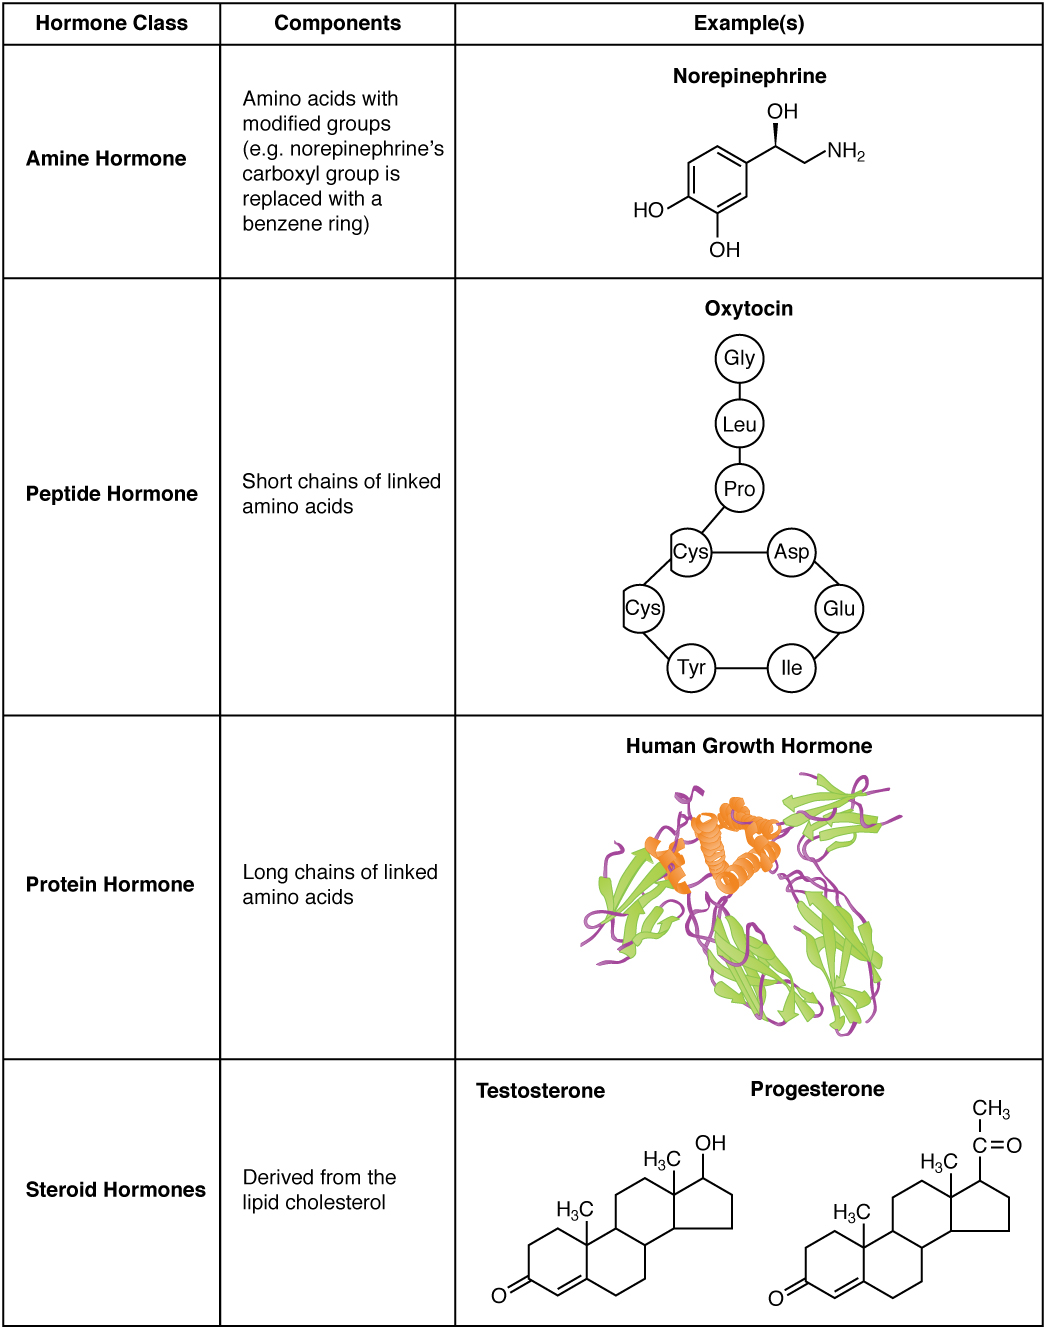 1802_Examples_of_Amine_Peptide_Protein_and_Steroid_Hormone_Structure.jpg